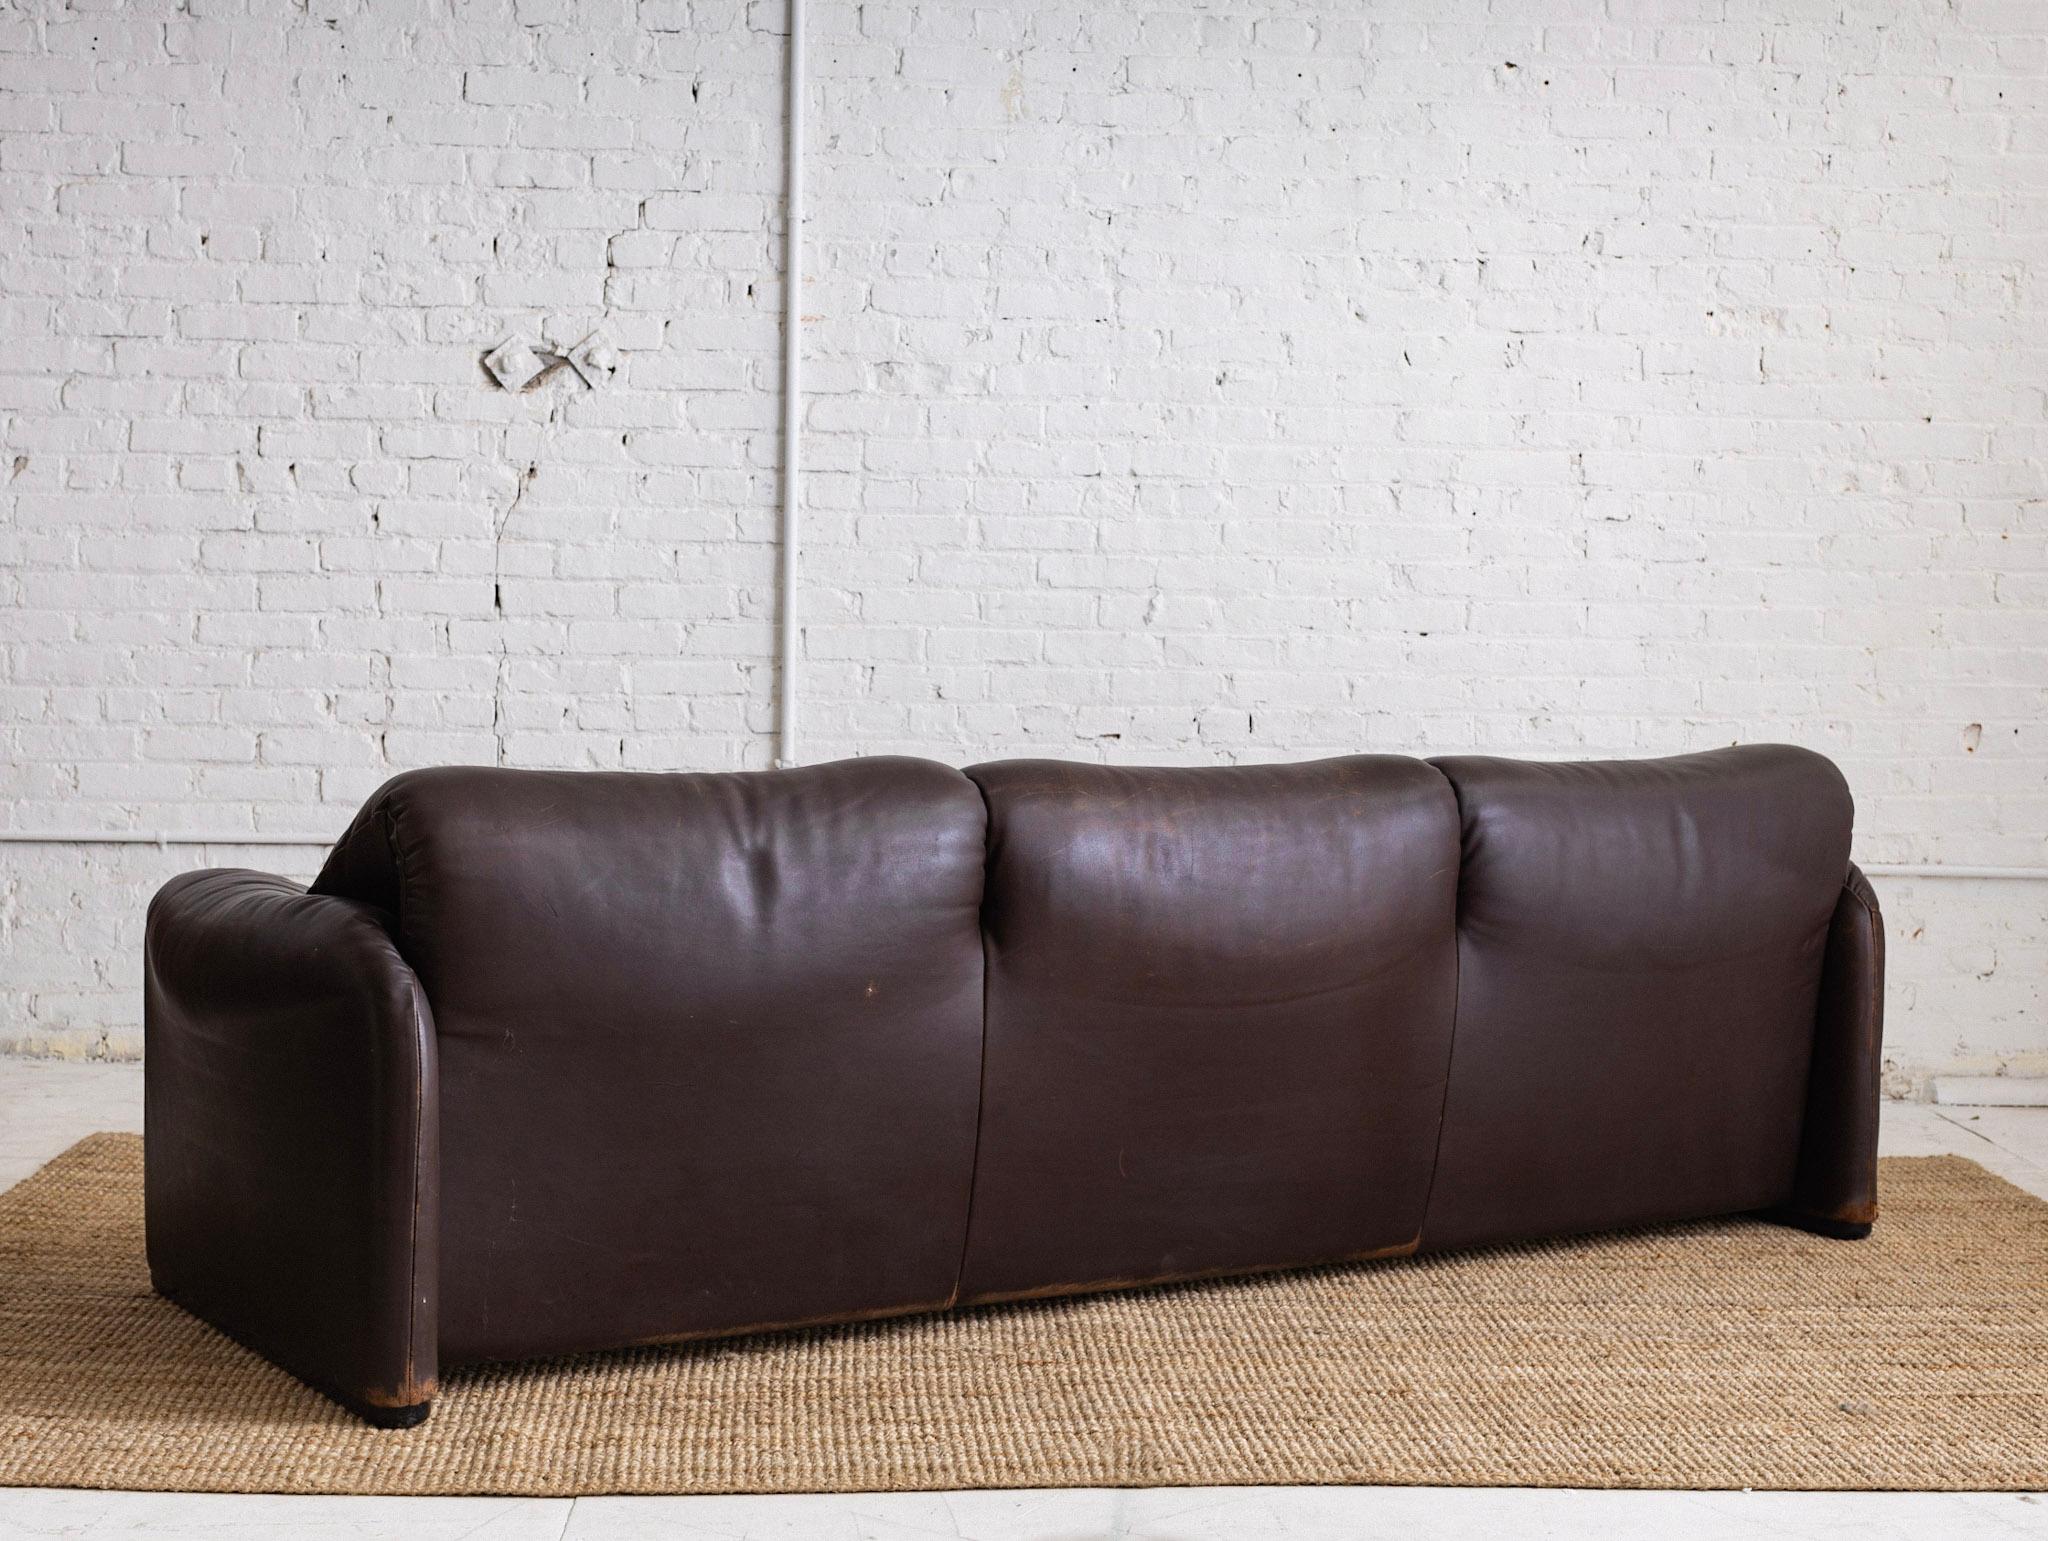 Maralunga 3 Seat Sofa by Vico Magistretti for Cassina in Chocolate Brown Leather 7